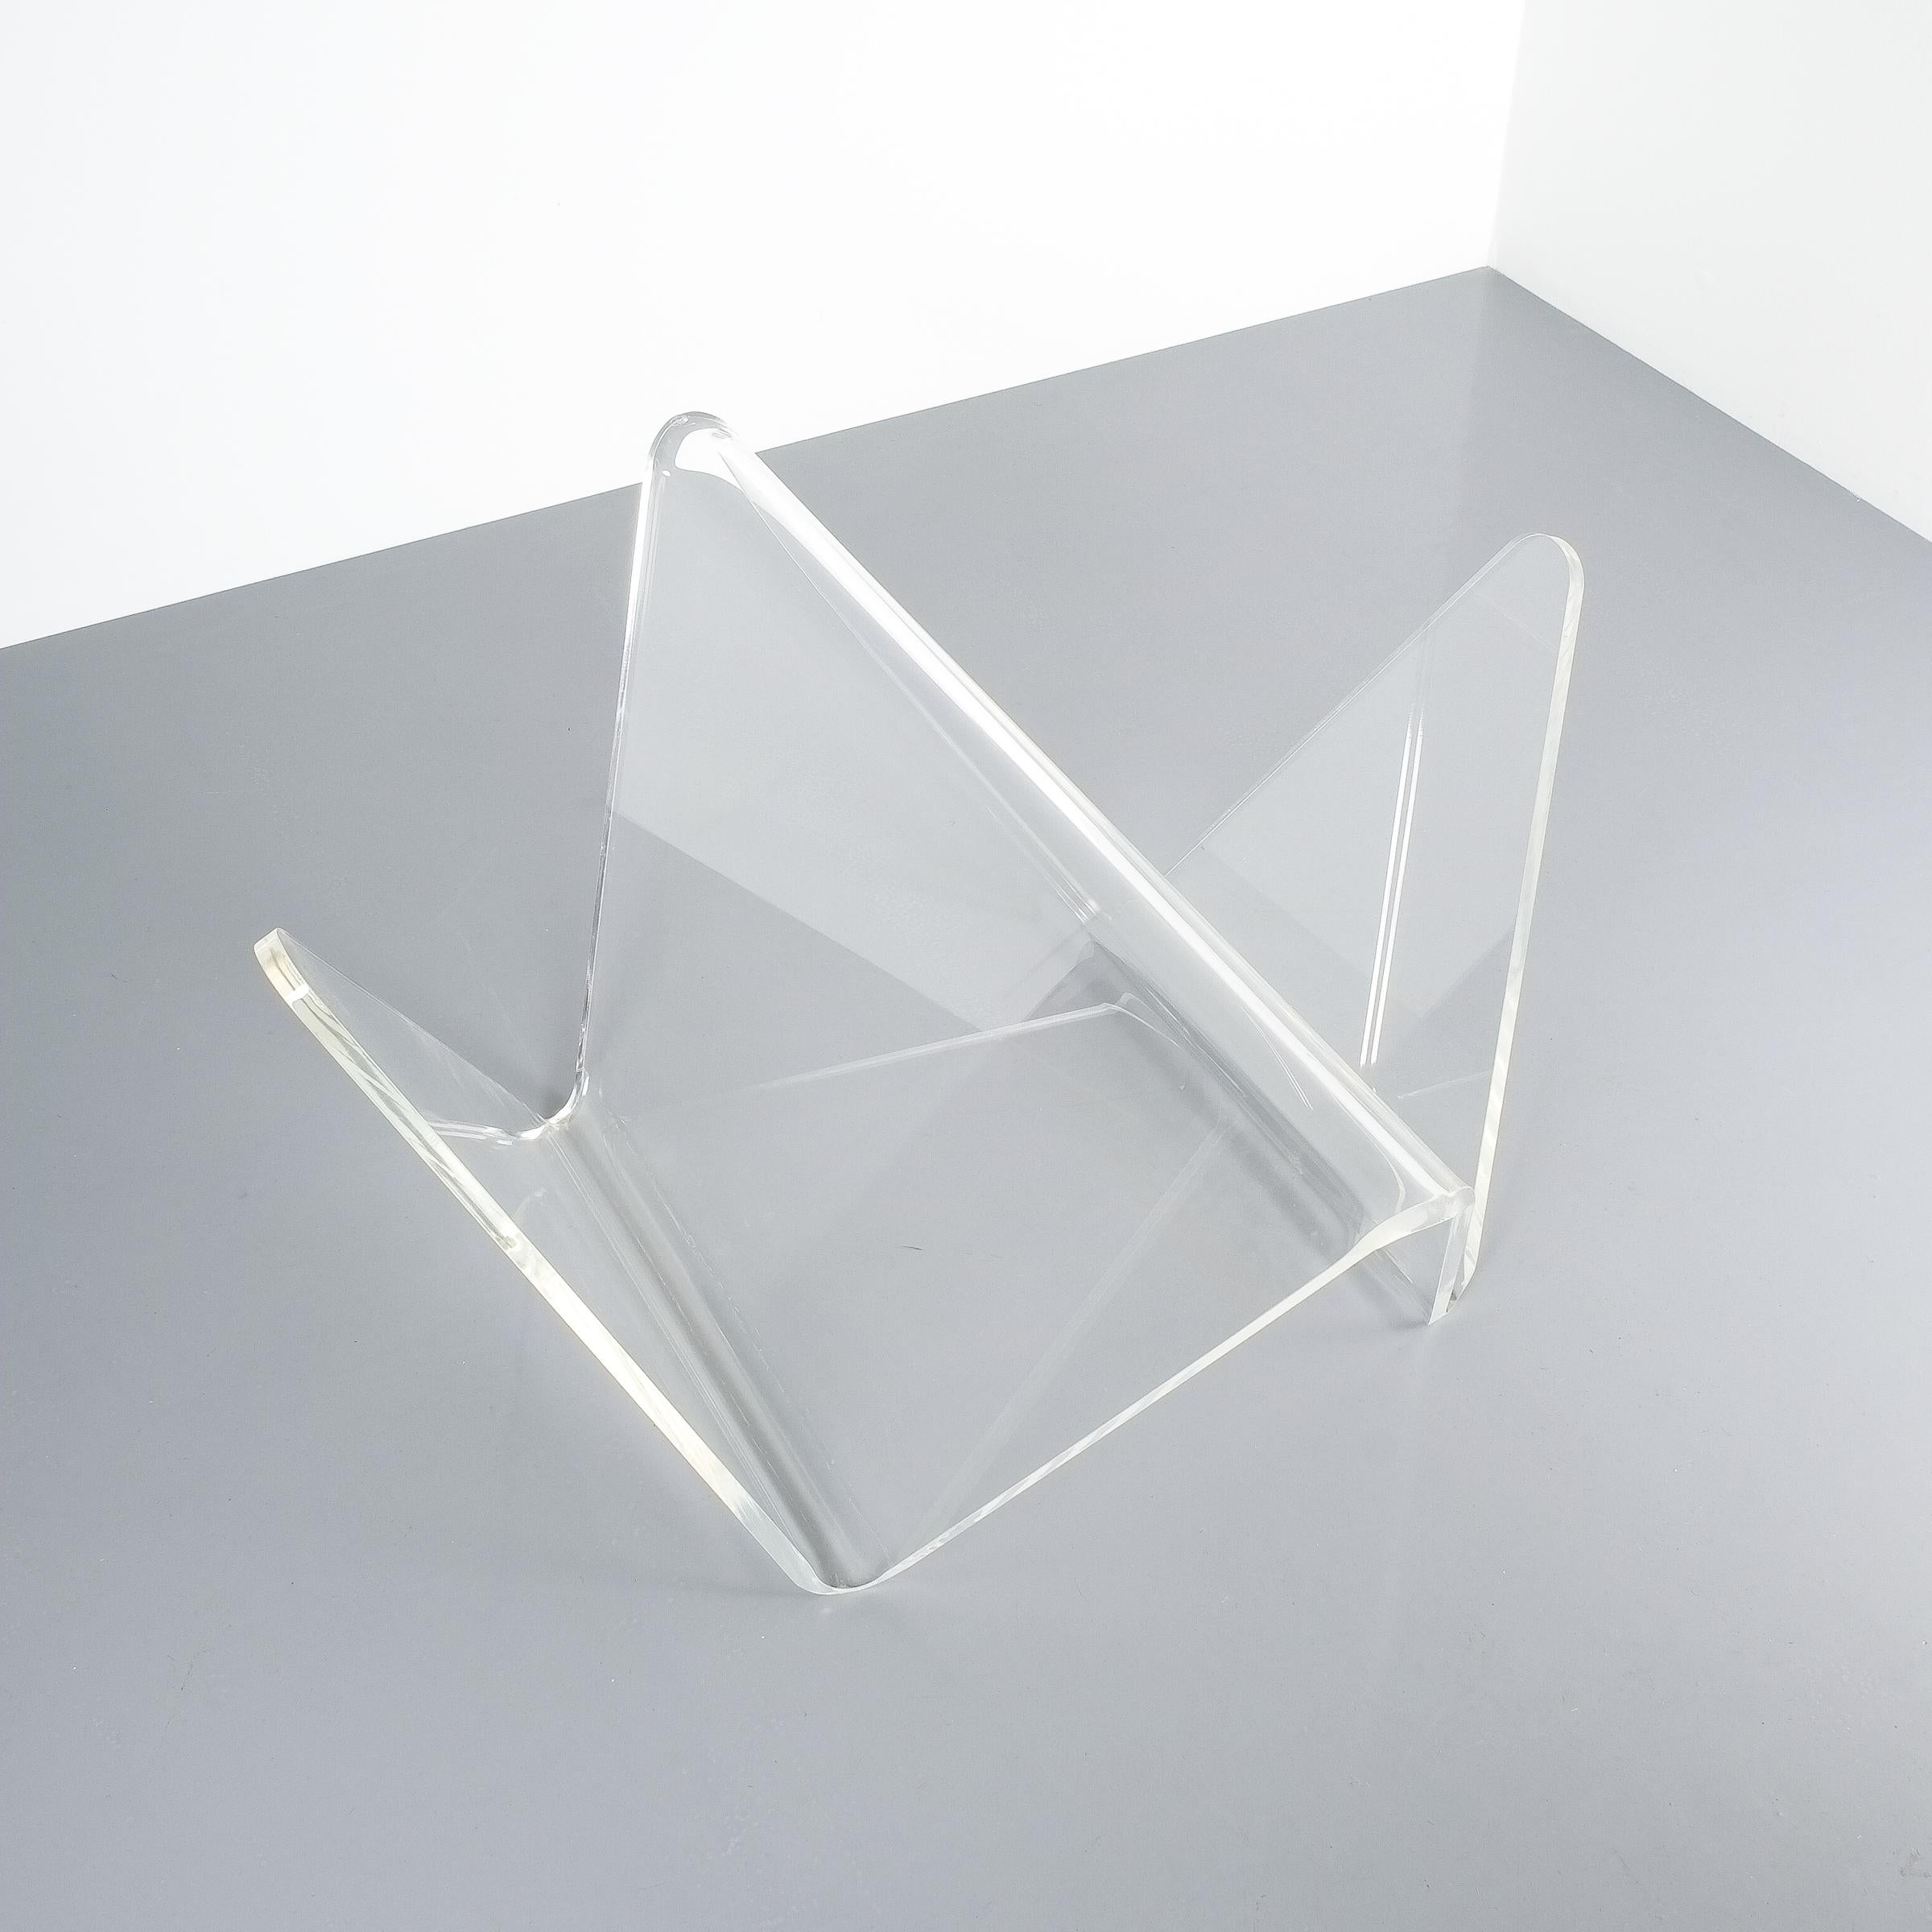 Mid-20th Century Giant Midcentury Lucite Magazine Rack or Easel, Germany circa 1960 For Sale